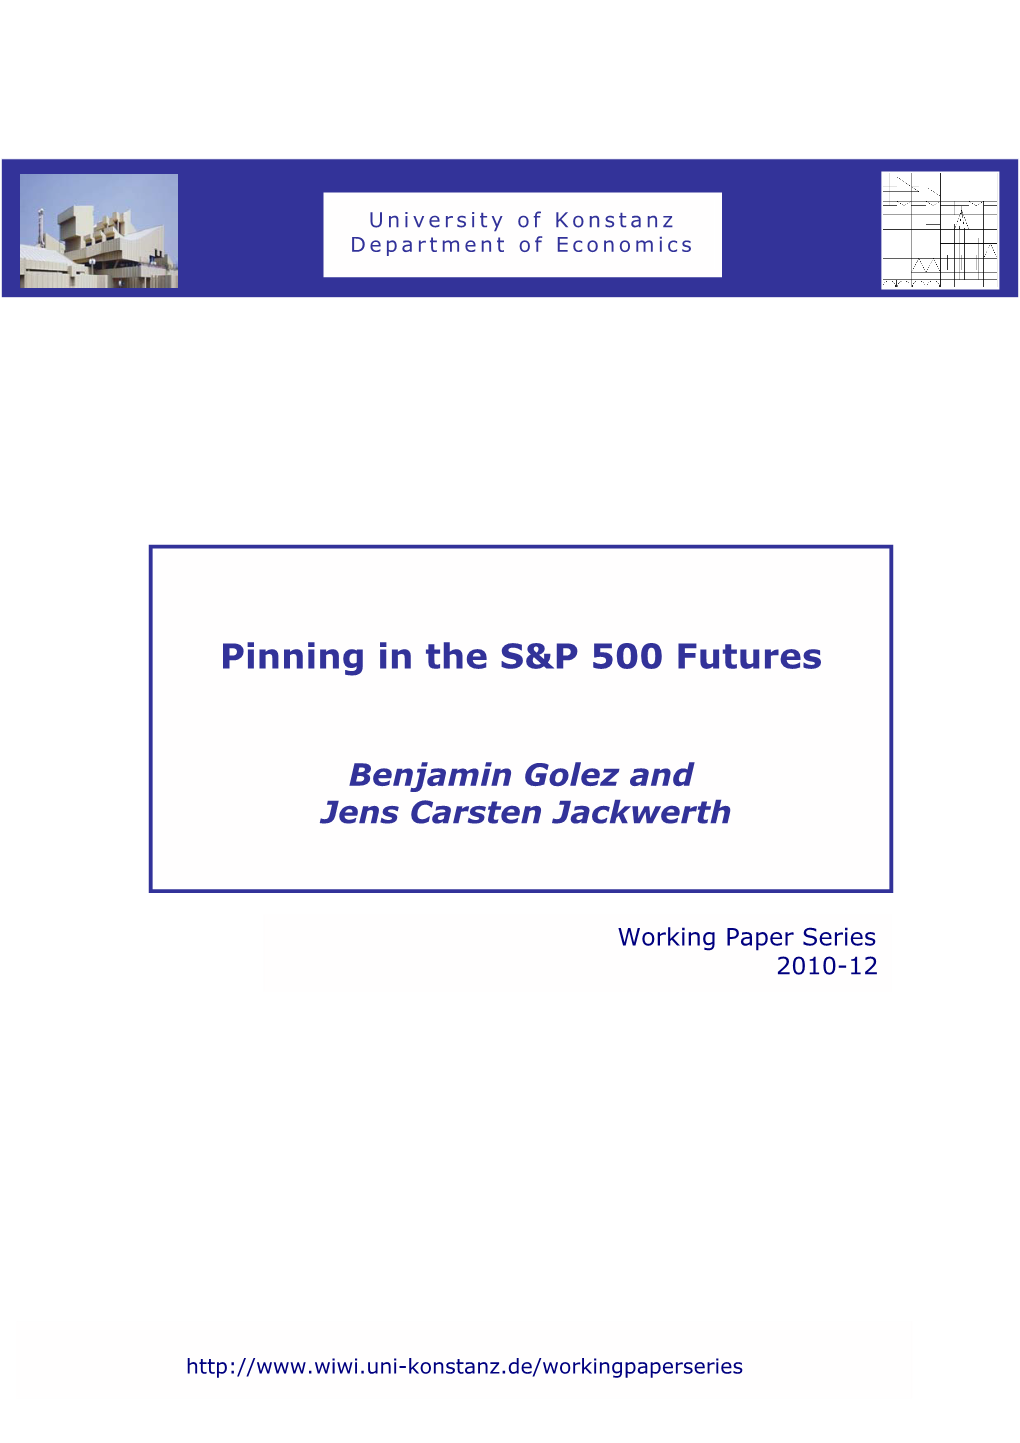 Pinning in the S&P 500 Futures